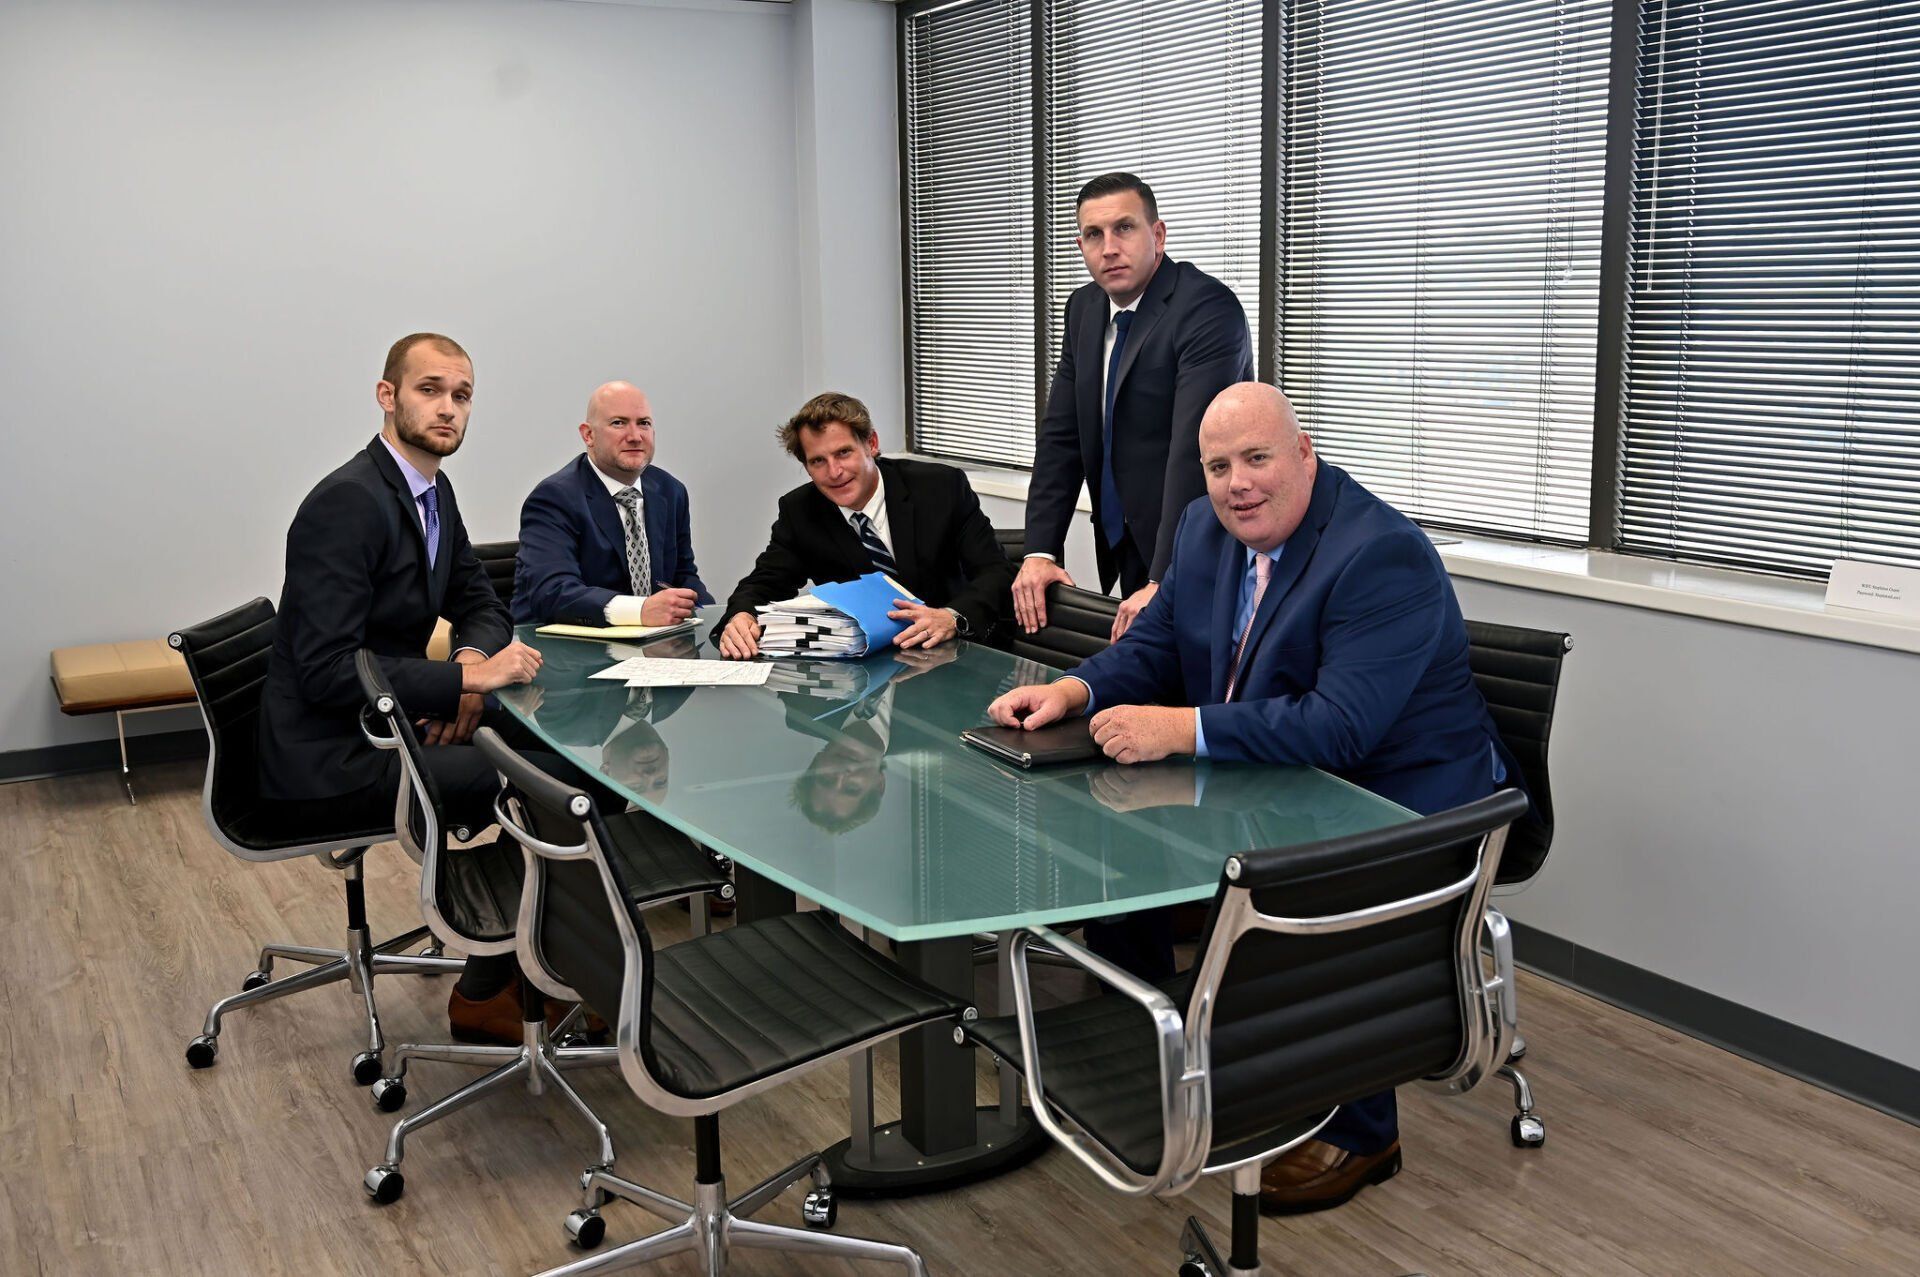 a group of men in suits are sitting around a conference table.